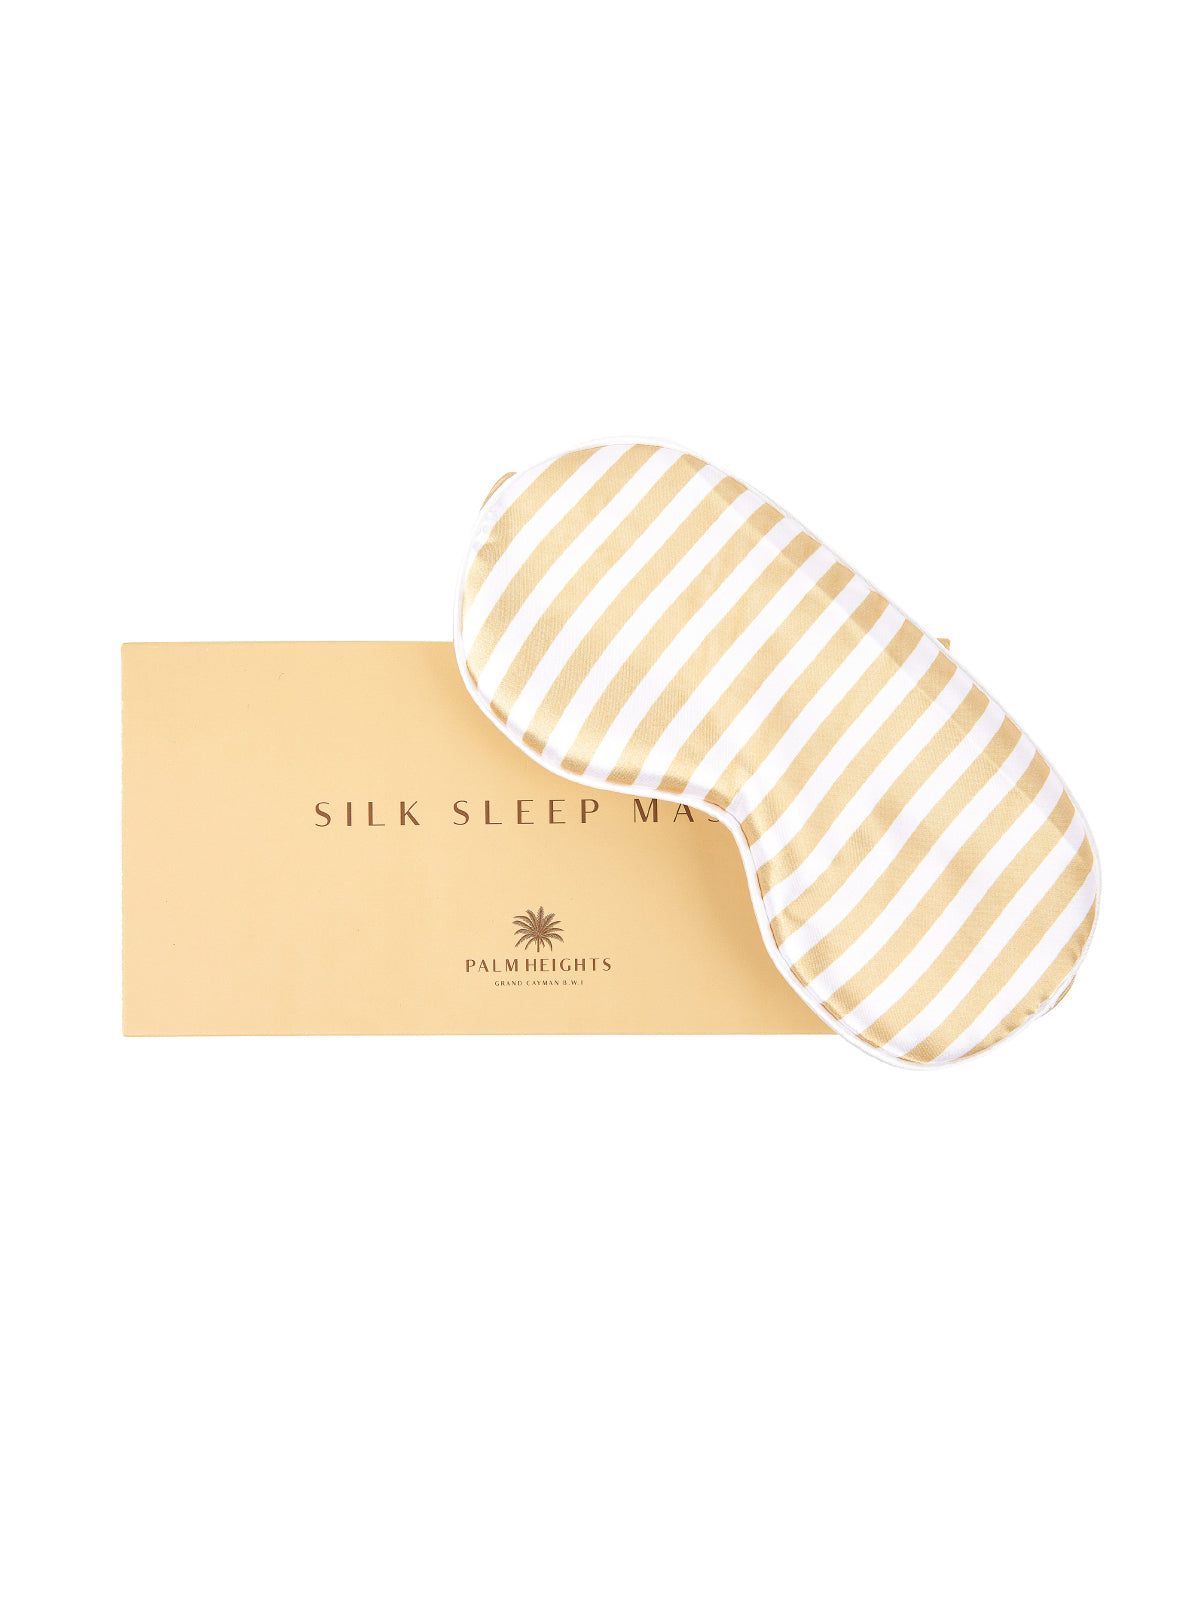 silk sleeping mask with packaging